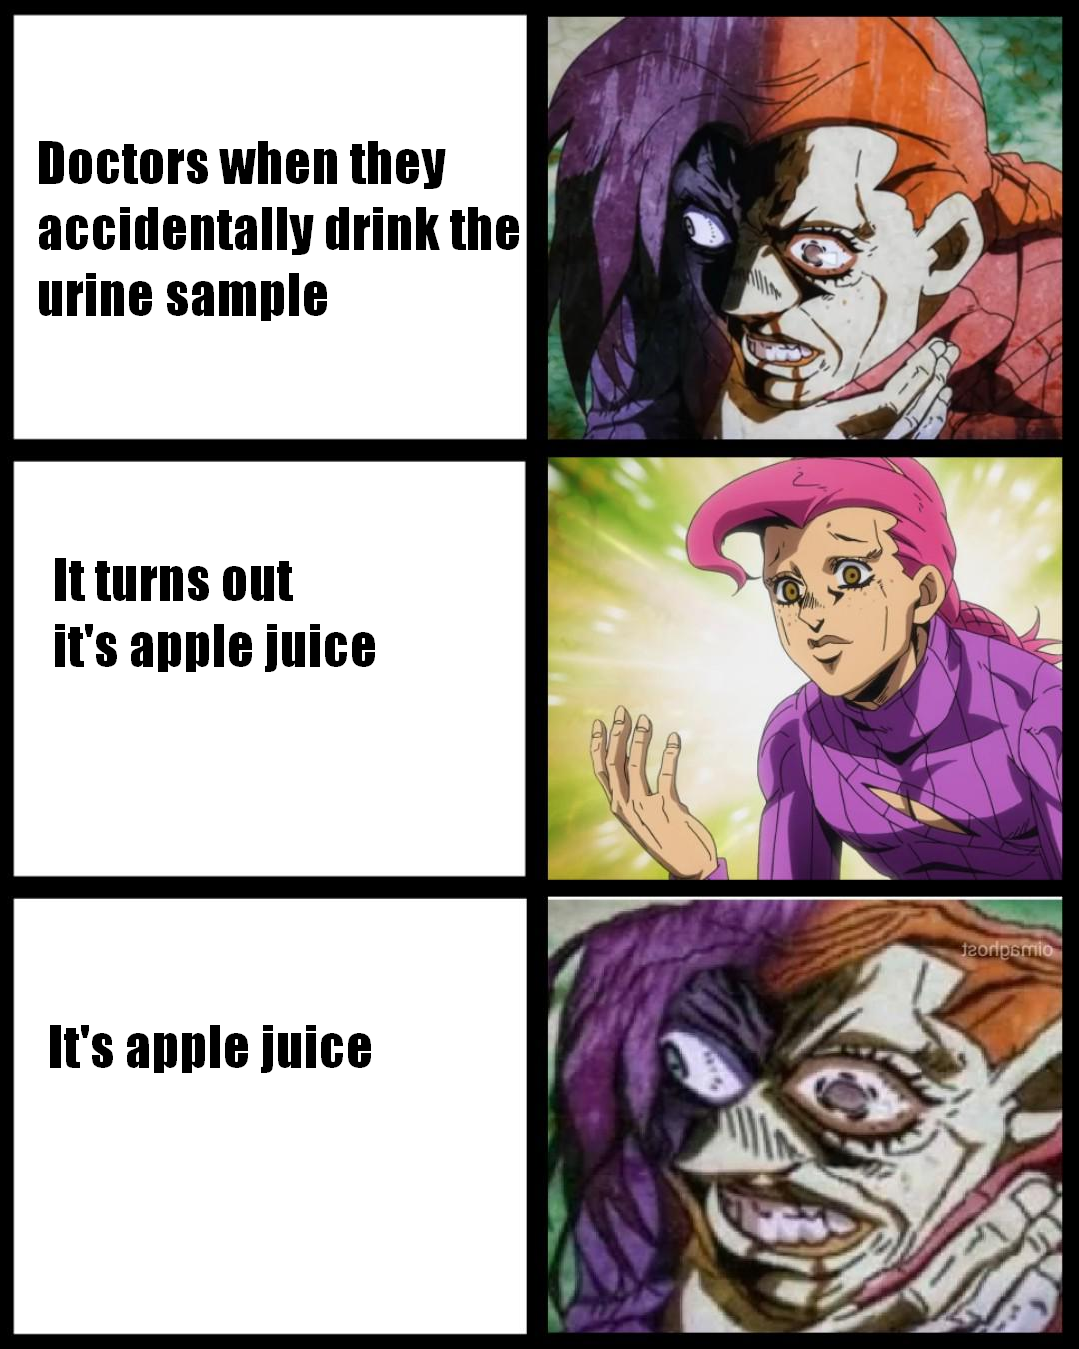 "An apple a day keeps the doctor away"